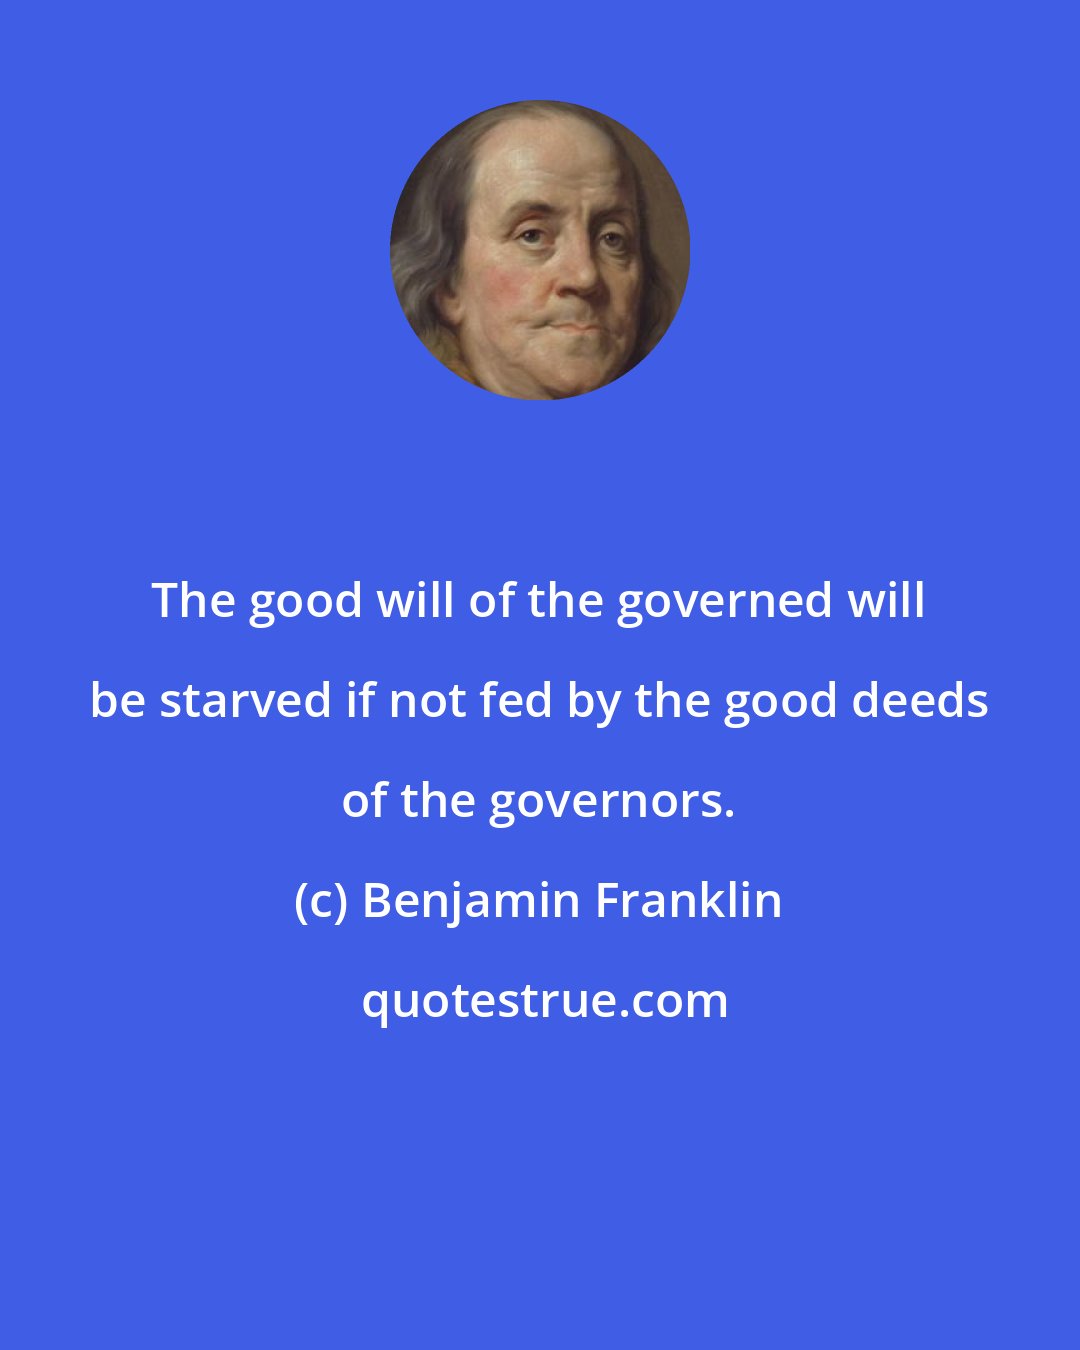 Benjamin Franklin: The good will of the governed will be starved if not fed by the good deeds of the governors.